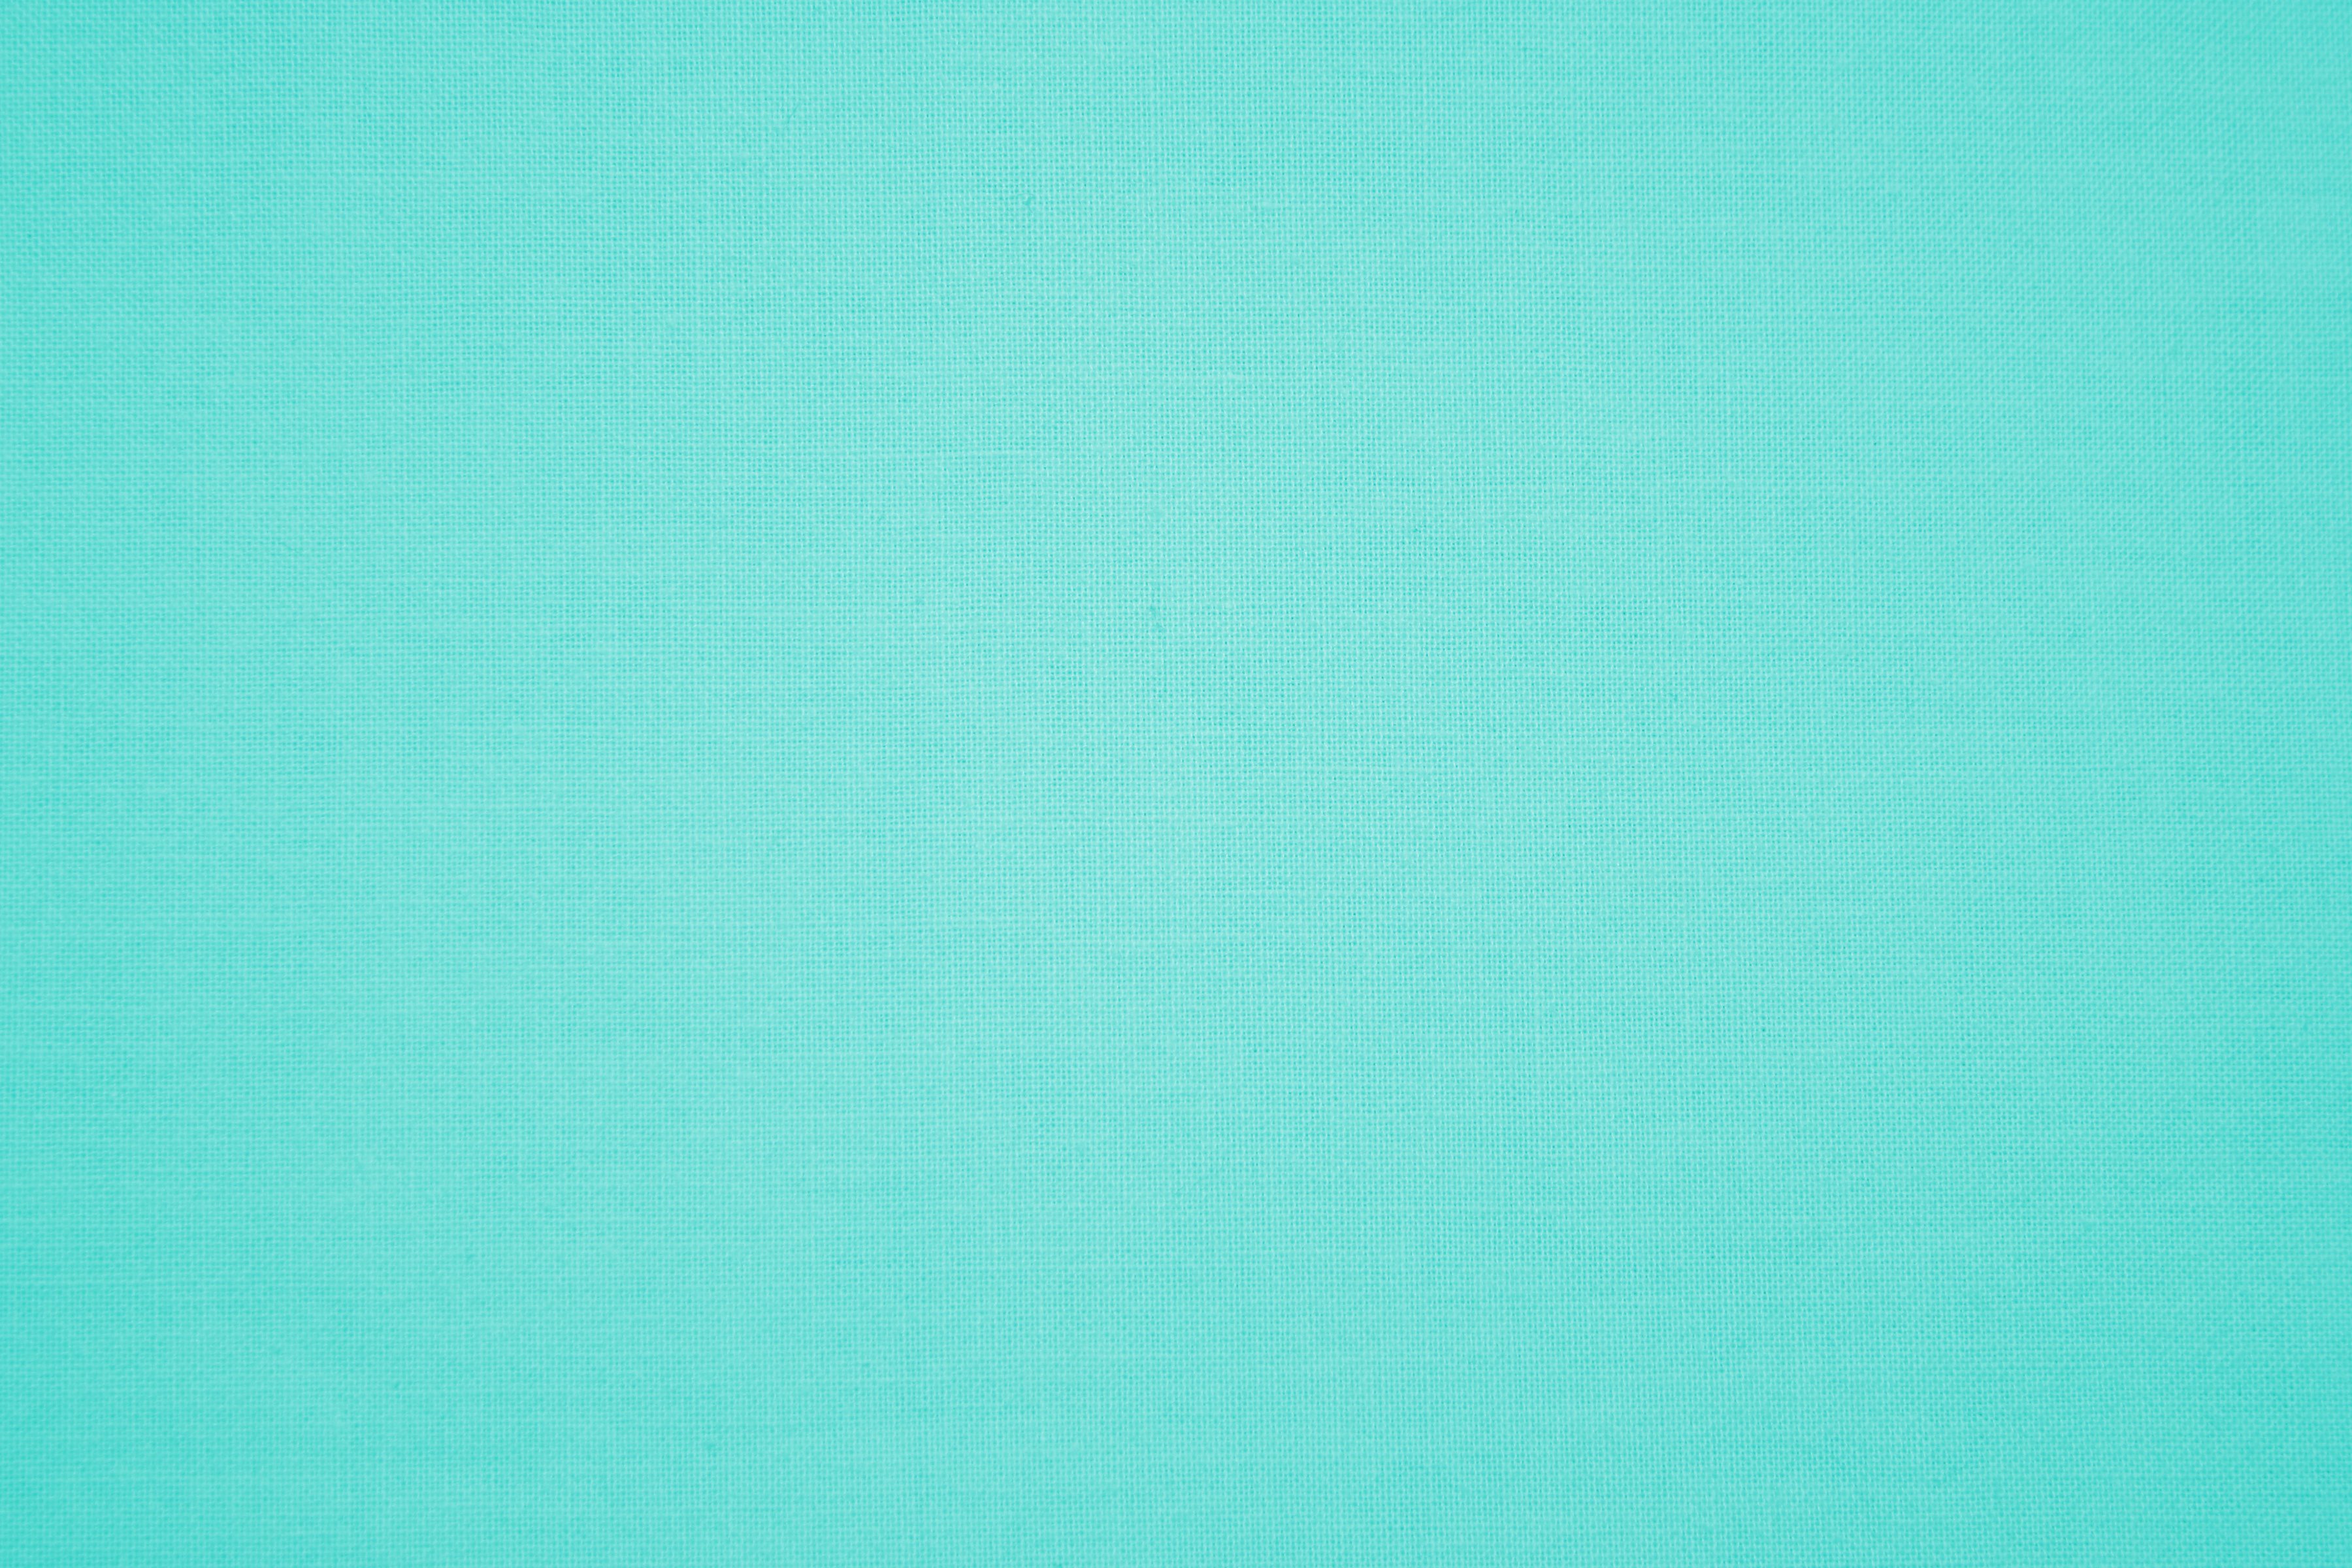 Turquoise Colored Canvas Fabric Texture Picture | Free Photograph ...